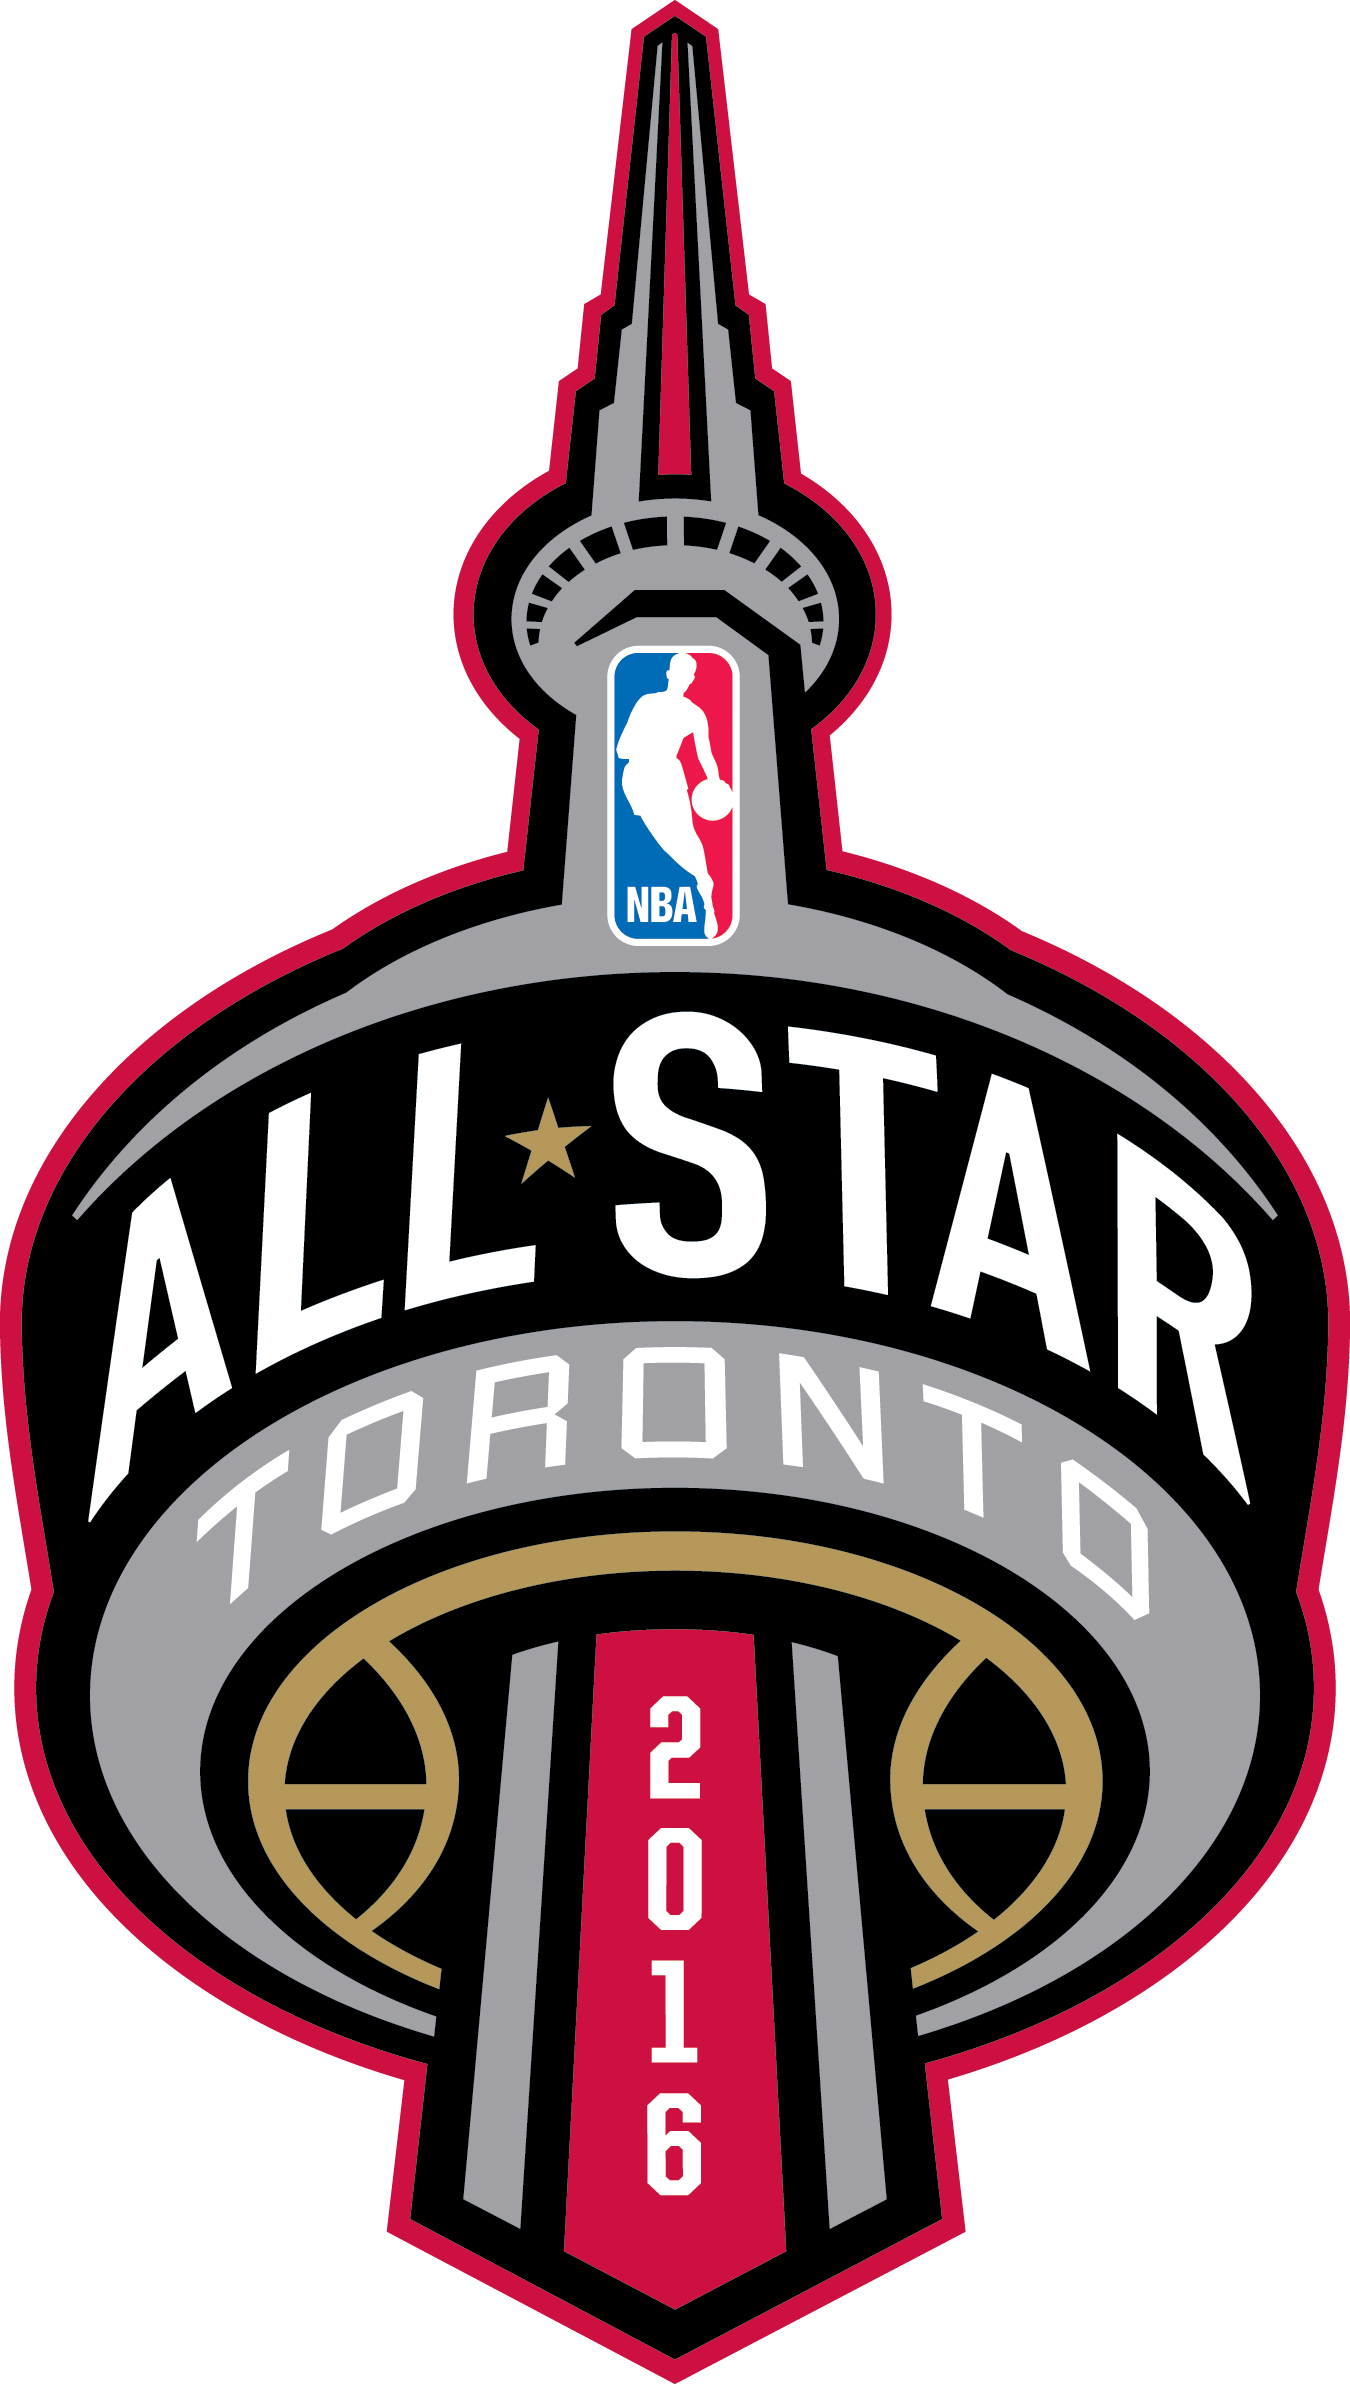 Ratings Roundup: NBA All-Star Game Hits Three-Year High, But All